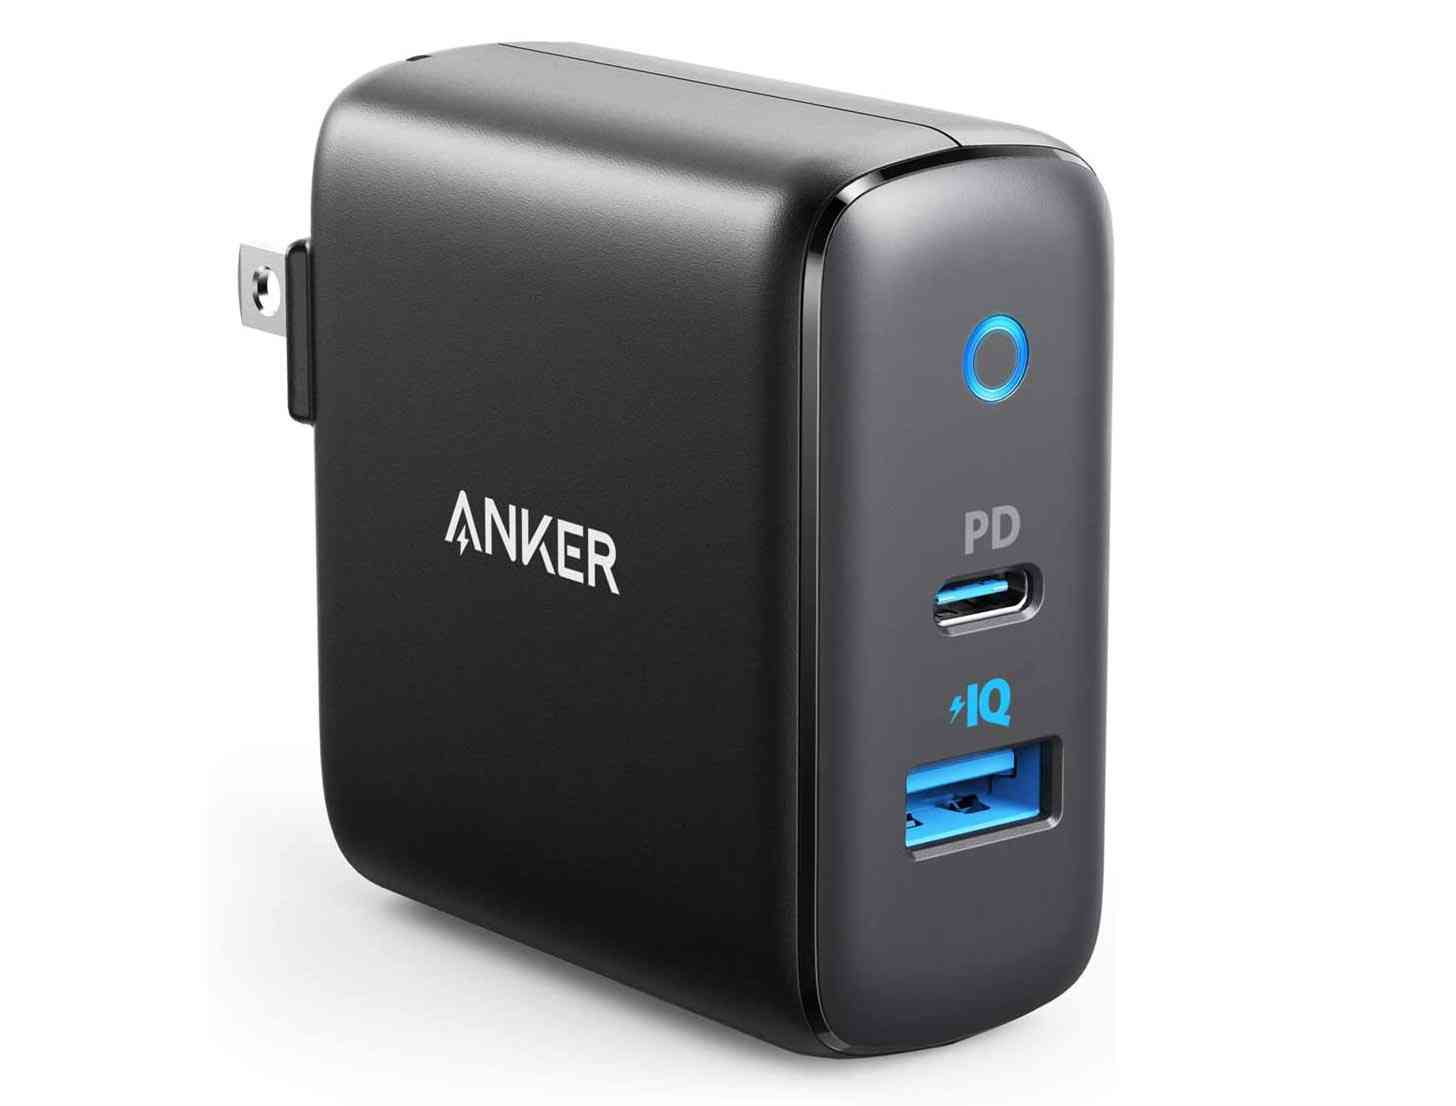 Anker PowerPort PD 2 wall charger